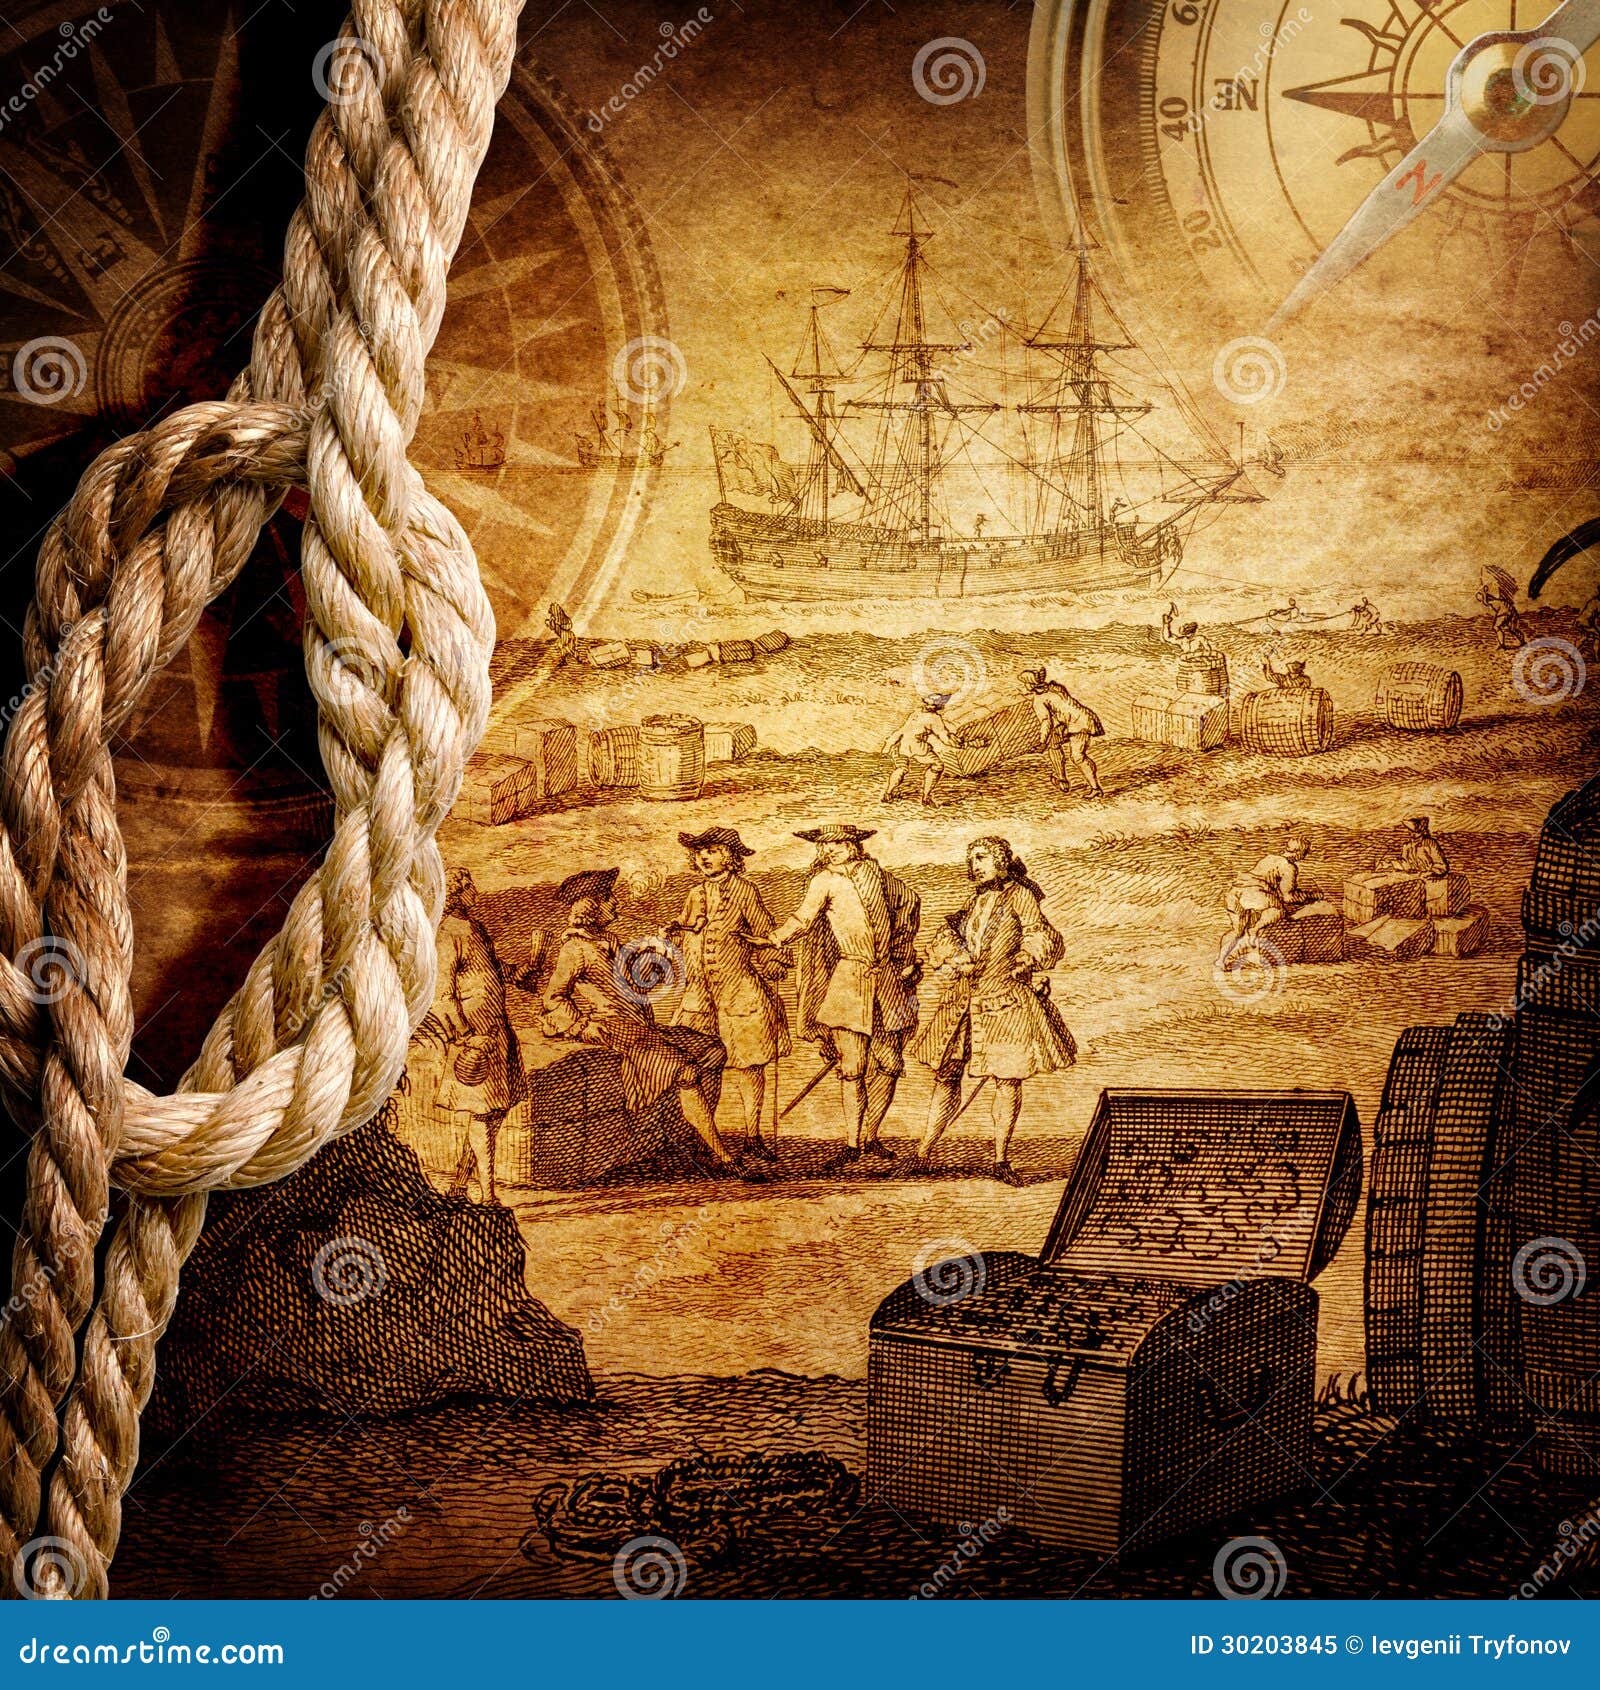 Adventure Stories Background Stock Image - Image of history, dirty: 30203845